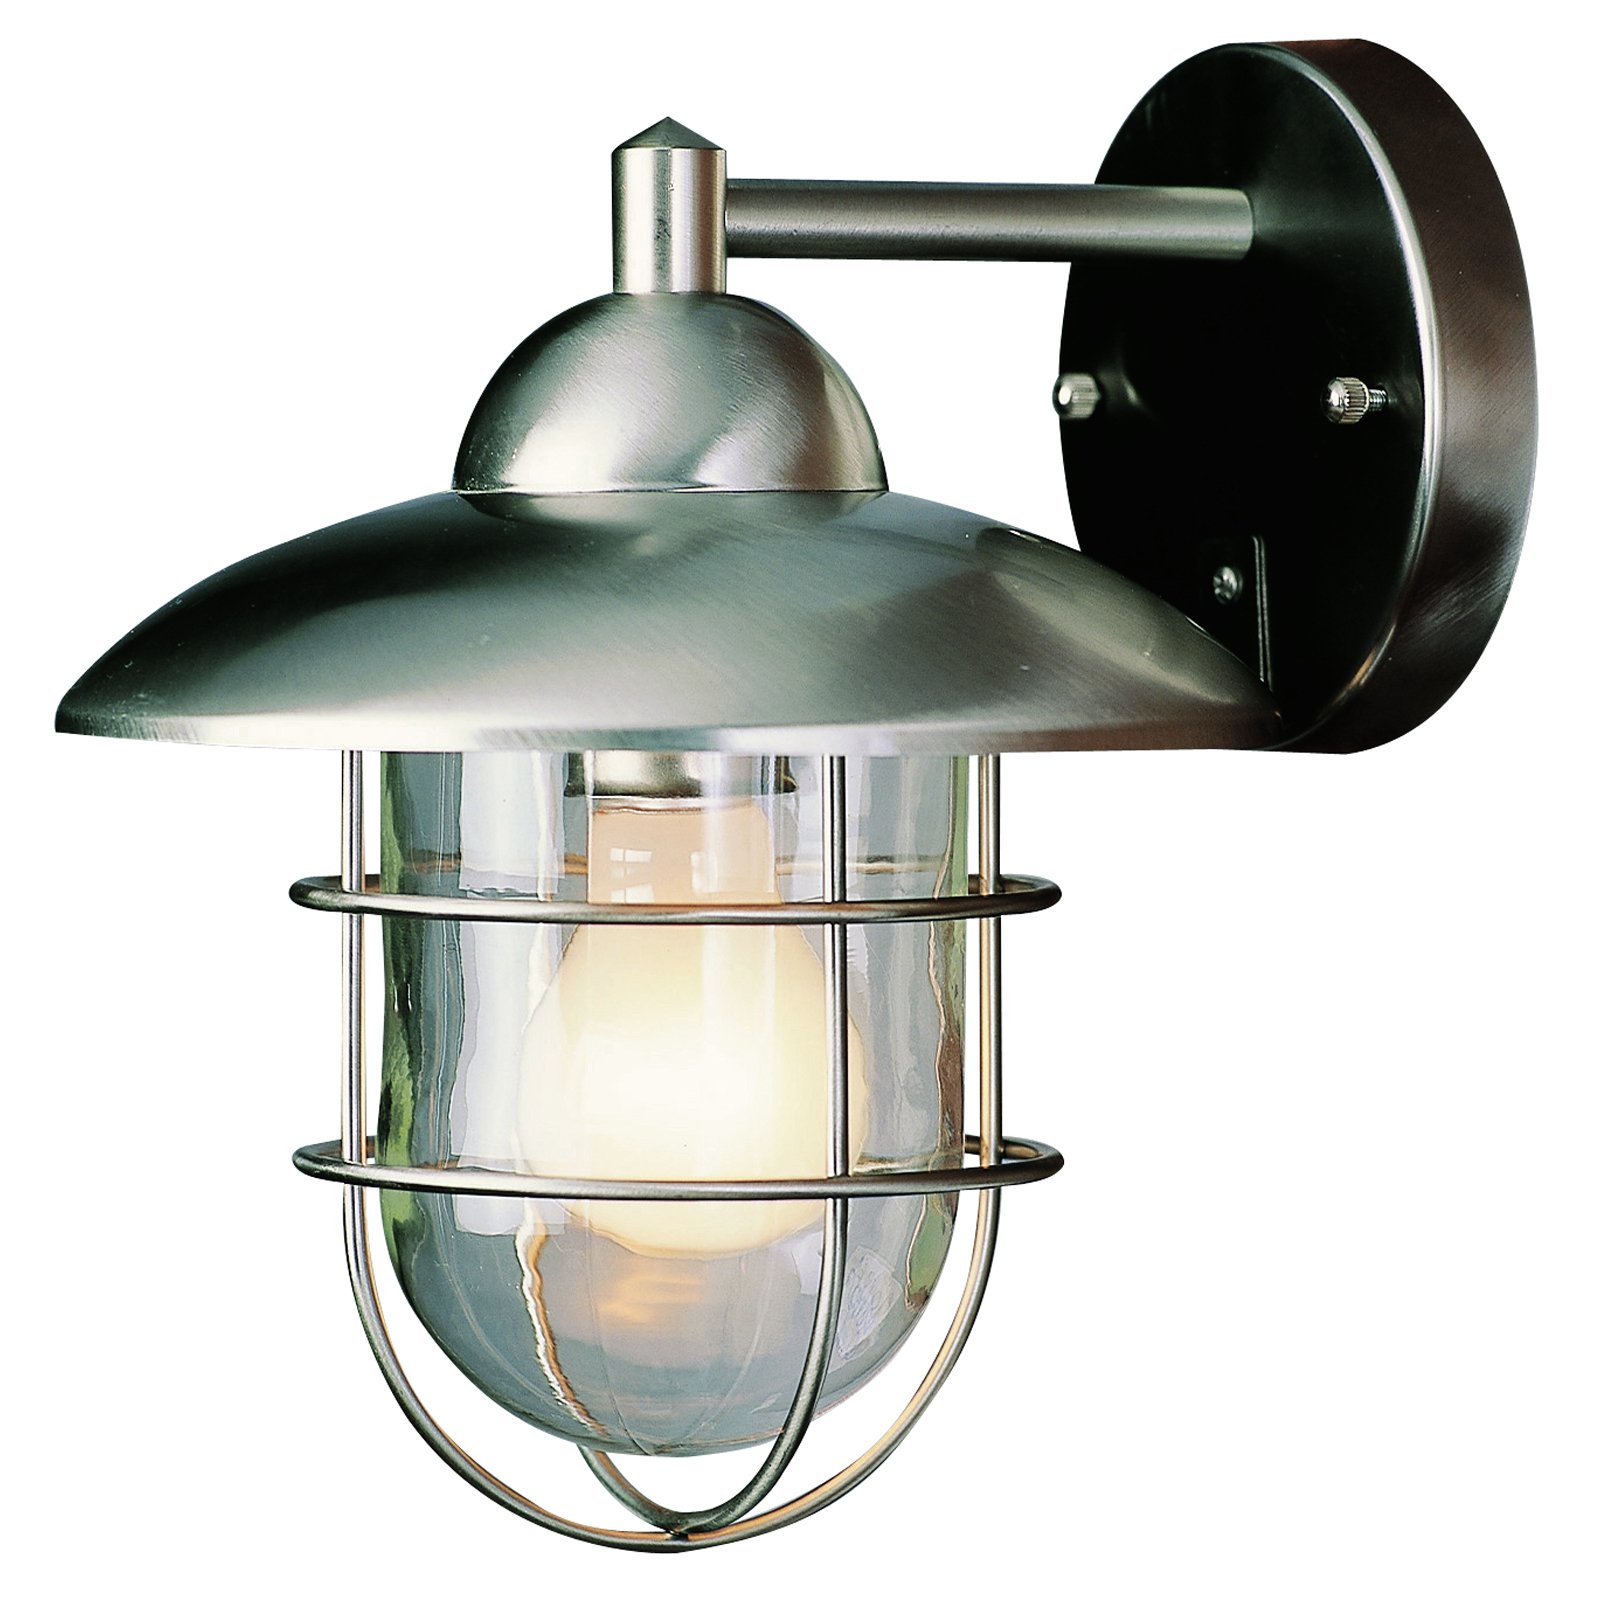 Bel Air Lighting Gull Silver Switch Incandescent Wall Lantern - image 1 of 2